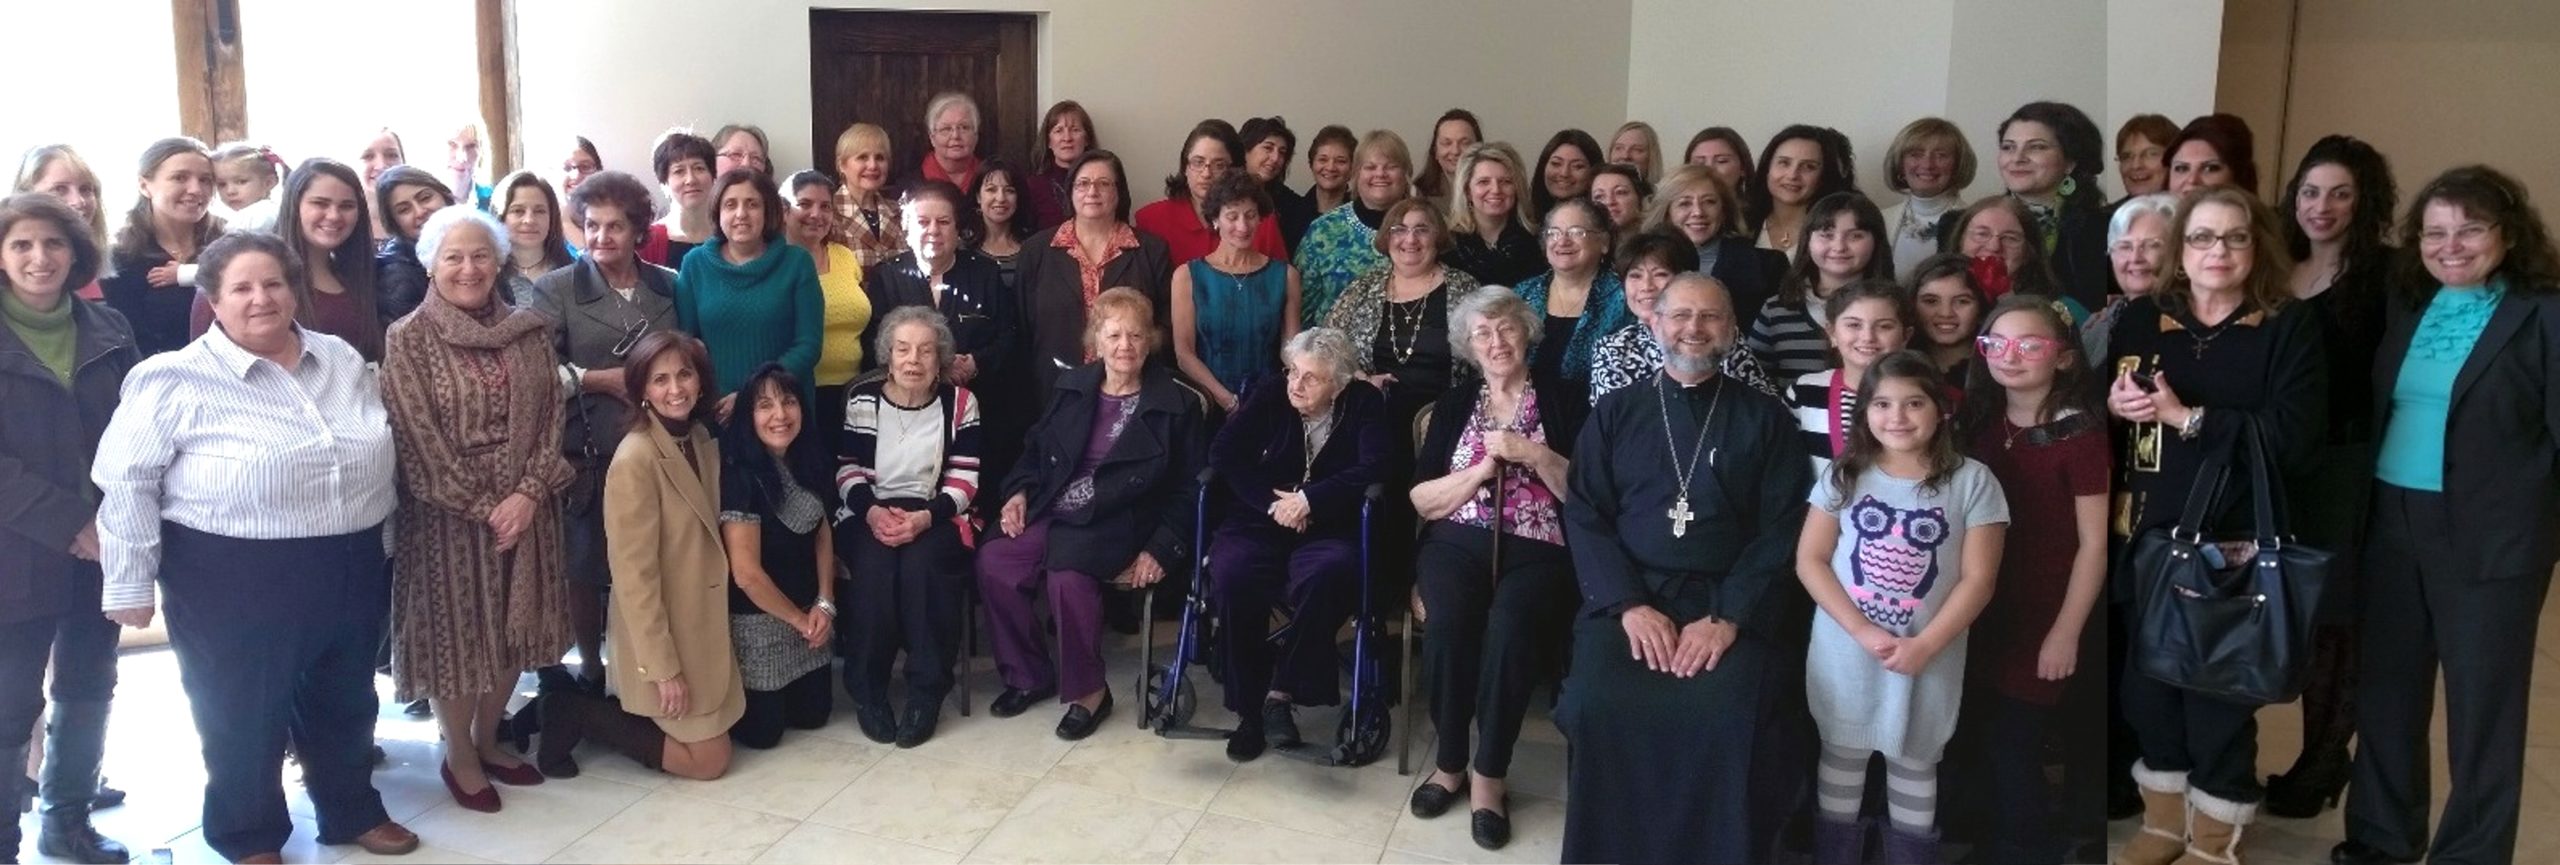 https://www.stgindy.org/wp-content/uploads/2021/09/Ladies-of-St.George-group-photo-20141102-scaled.jpg